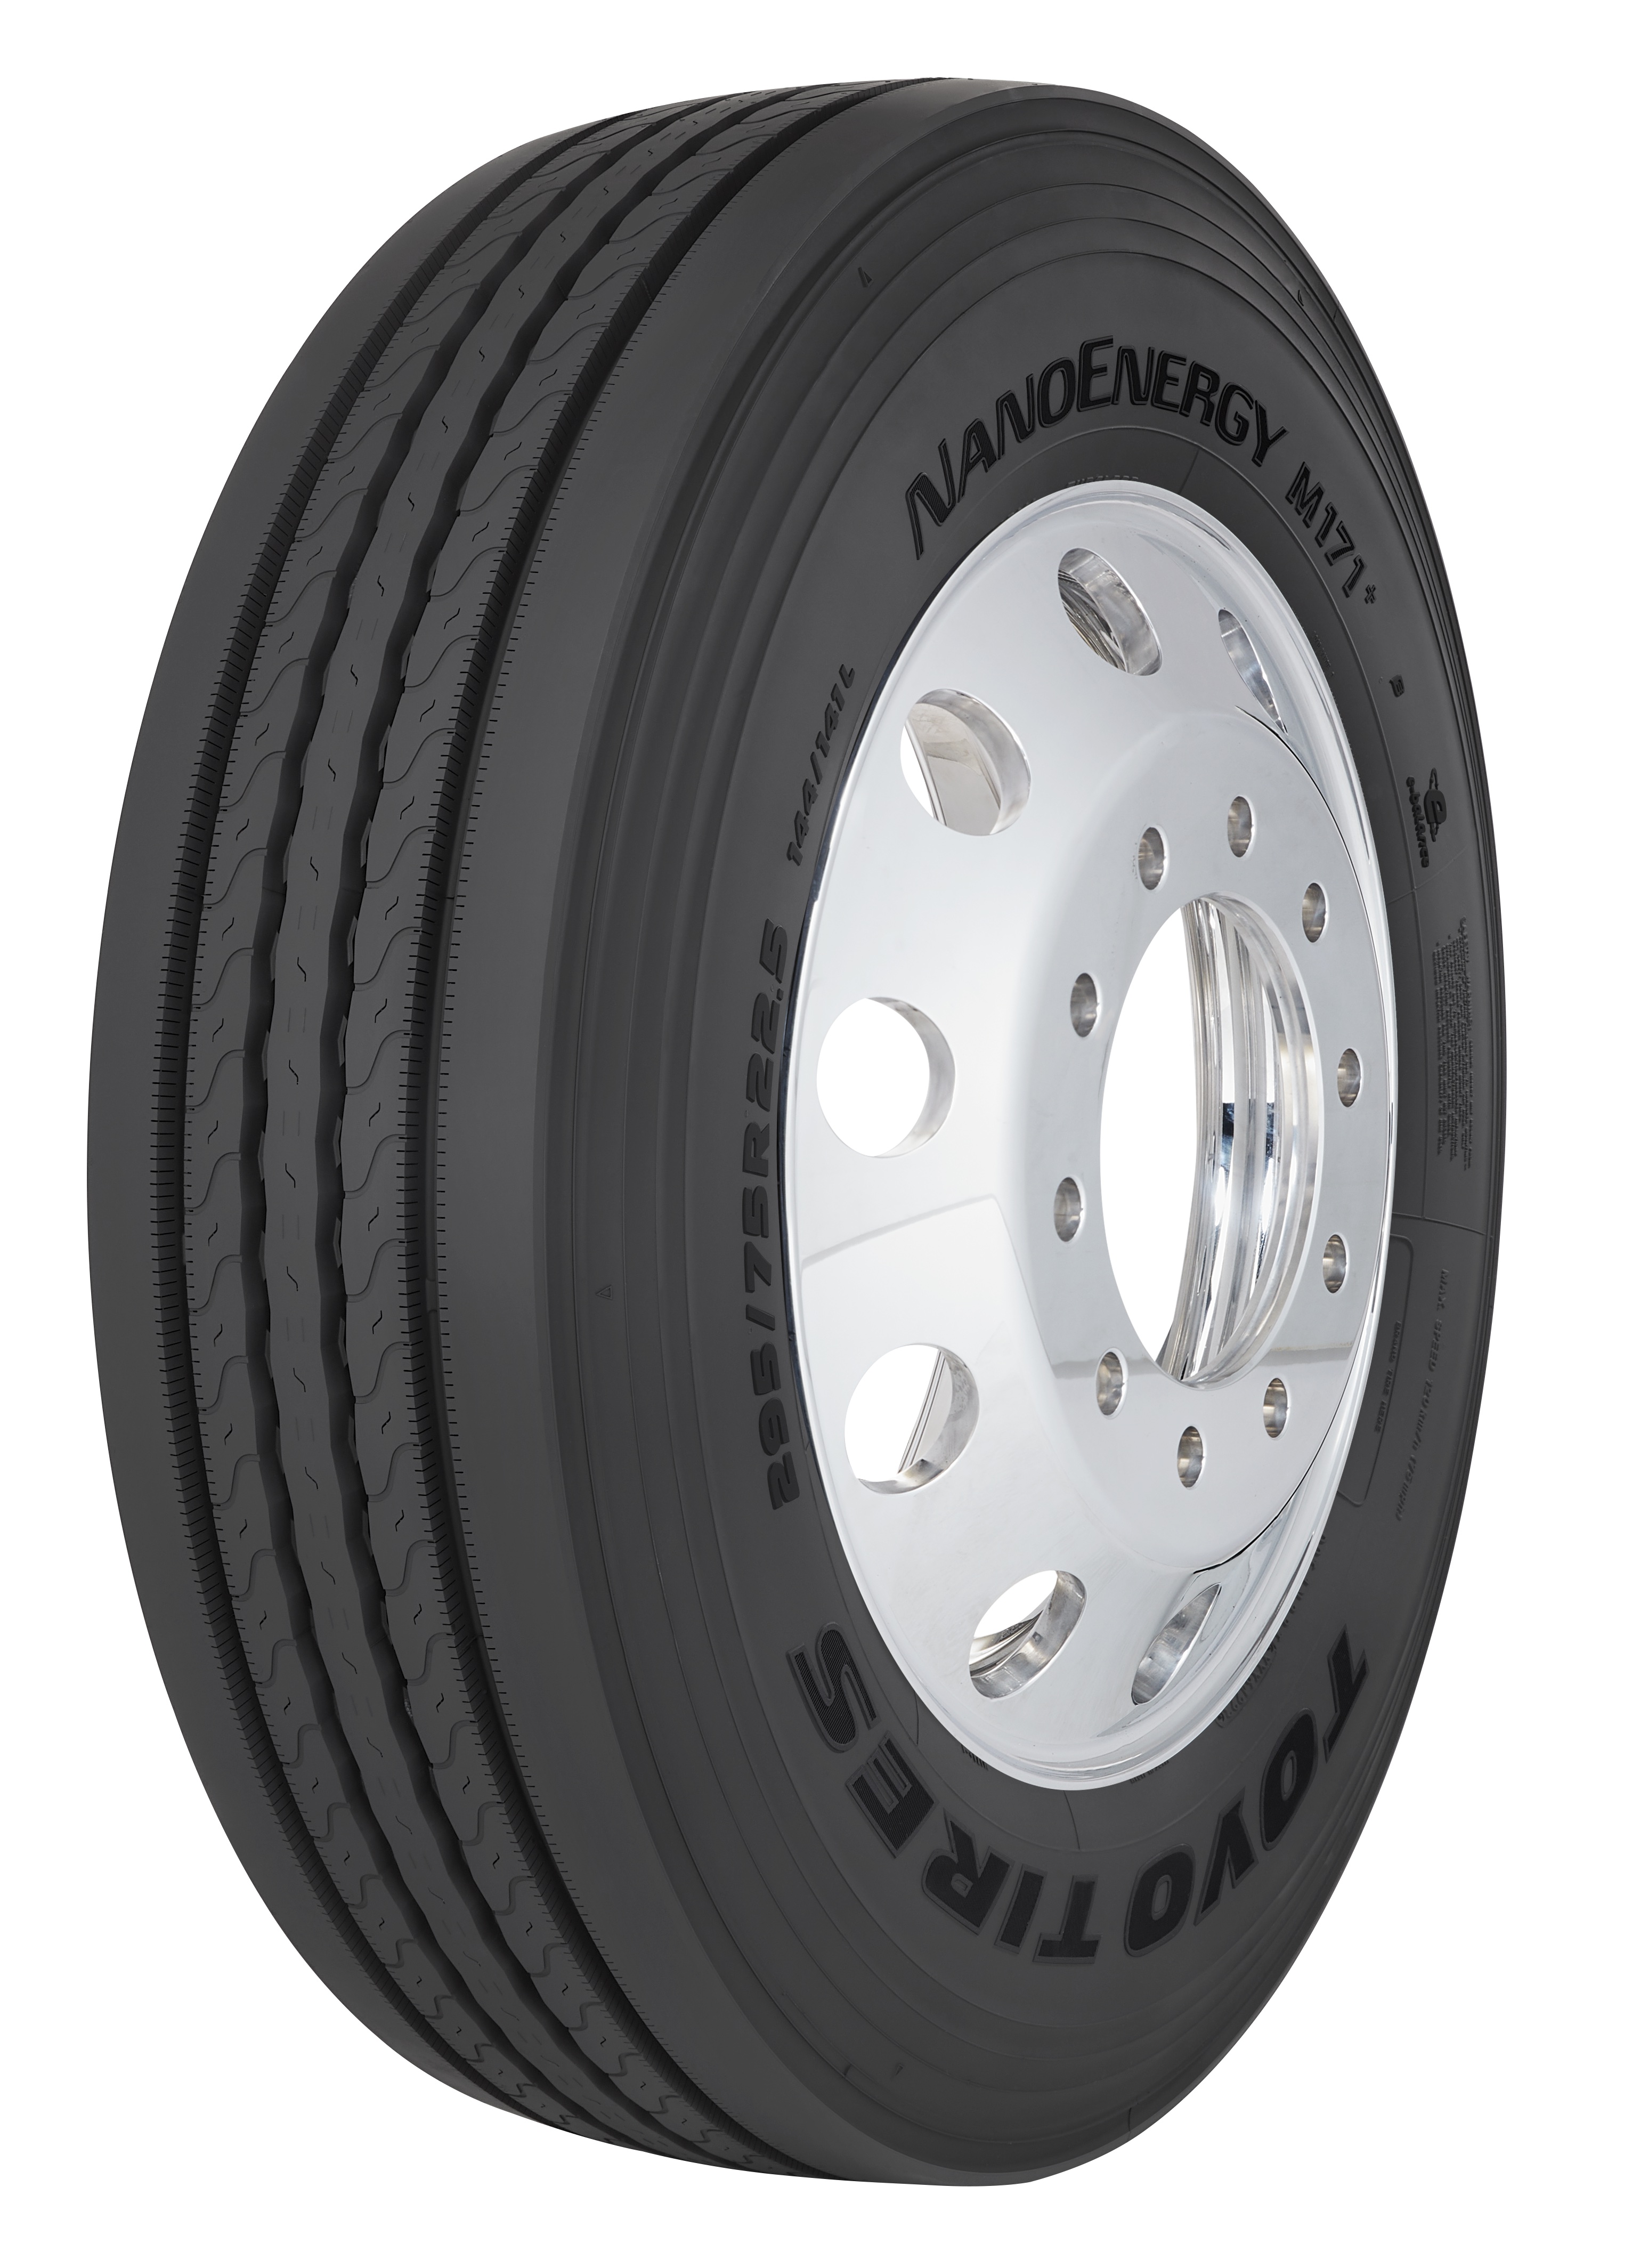 Toyo Tires Announces New Compound Upgrade for Increased Mileage on Three  Existing Long Haul and Regional Truck Tires